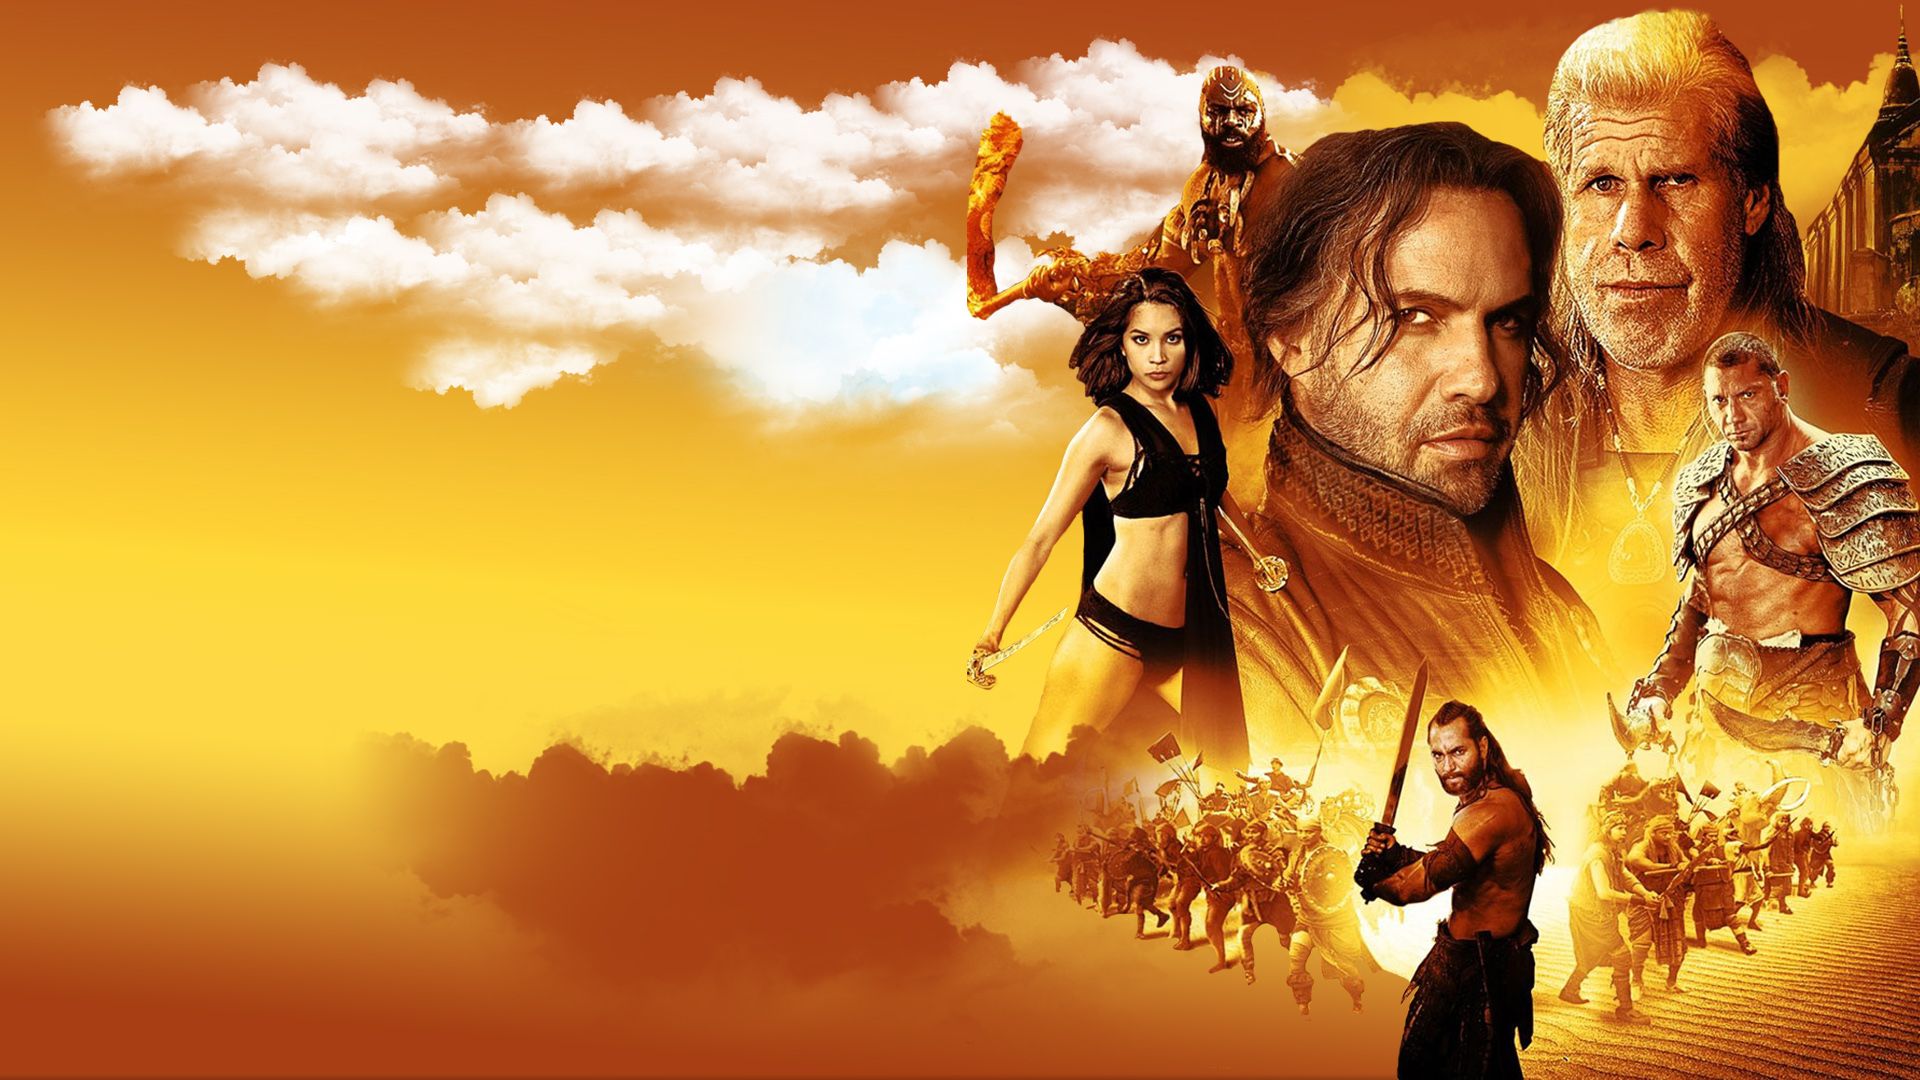 The Scorpion King 3: Battle for Redemption background